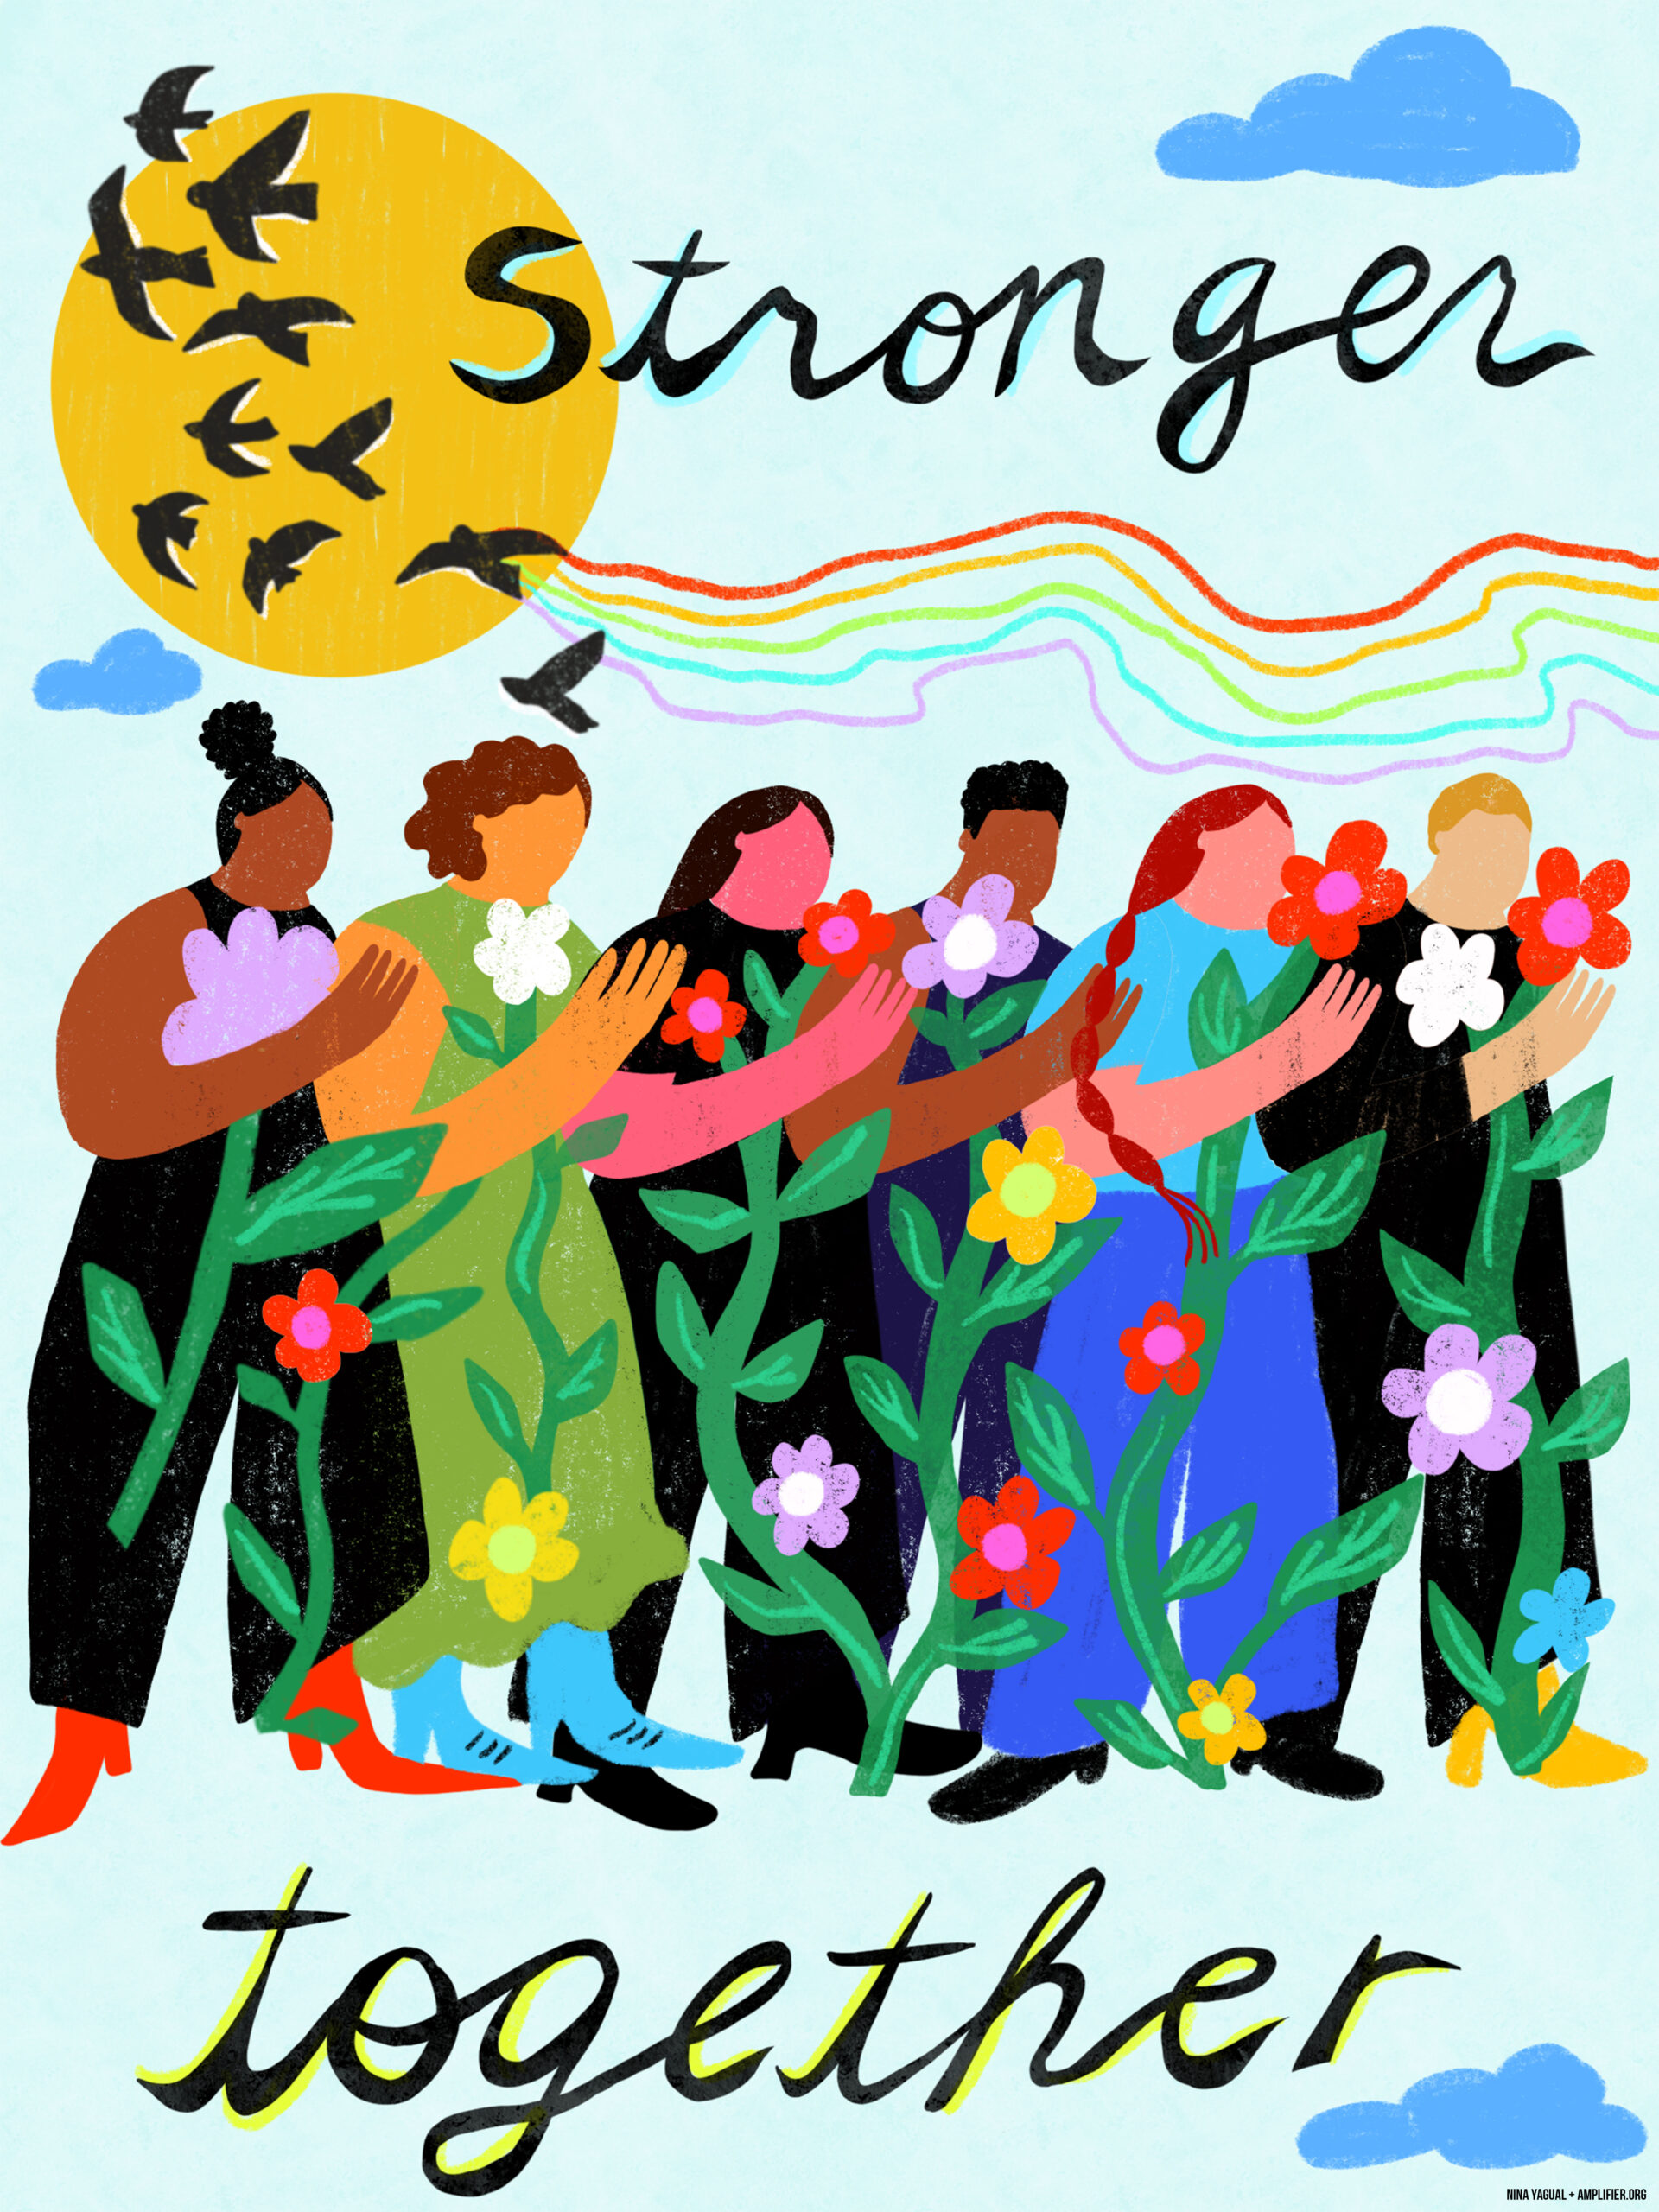 Stronger together shows men and women of different races side-by-side, hands forward, holding an array of giant flowers. Above them, a flock of birds flies in front of the sun. 